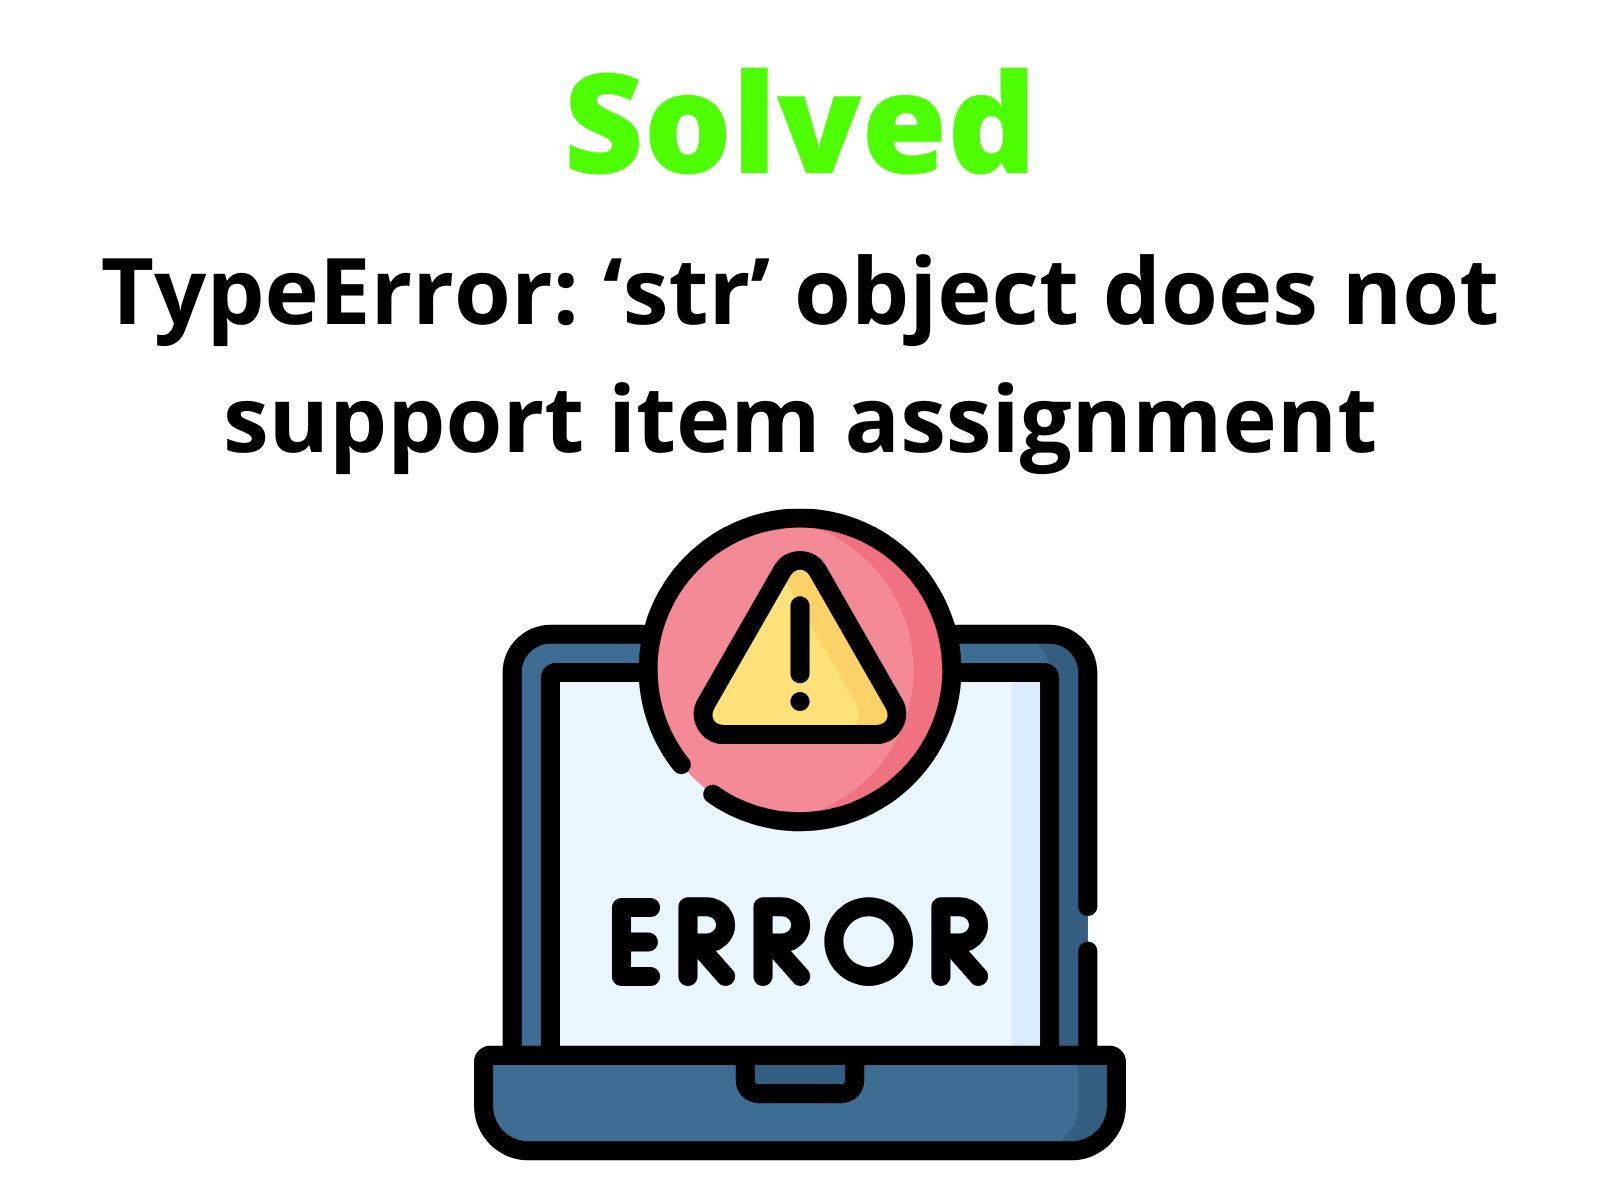 property' object does not support item assignment openpyxl